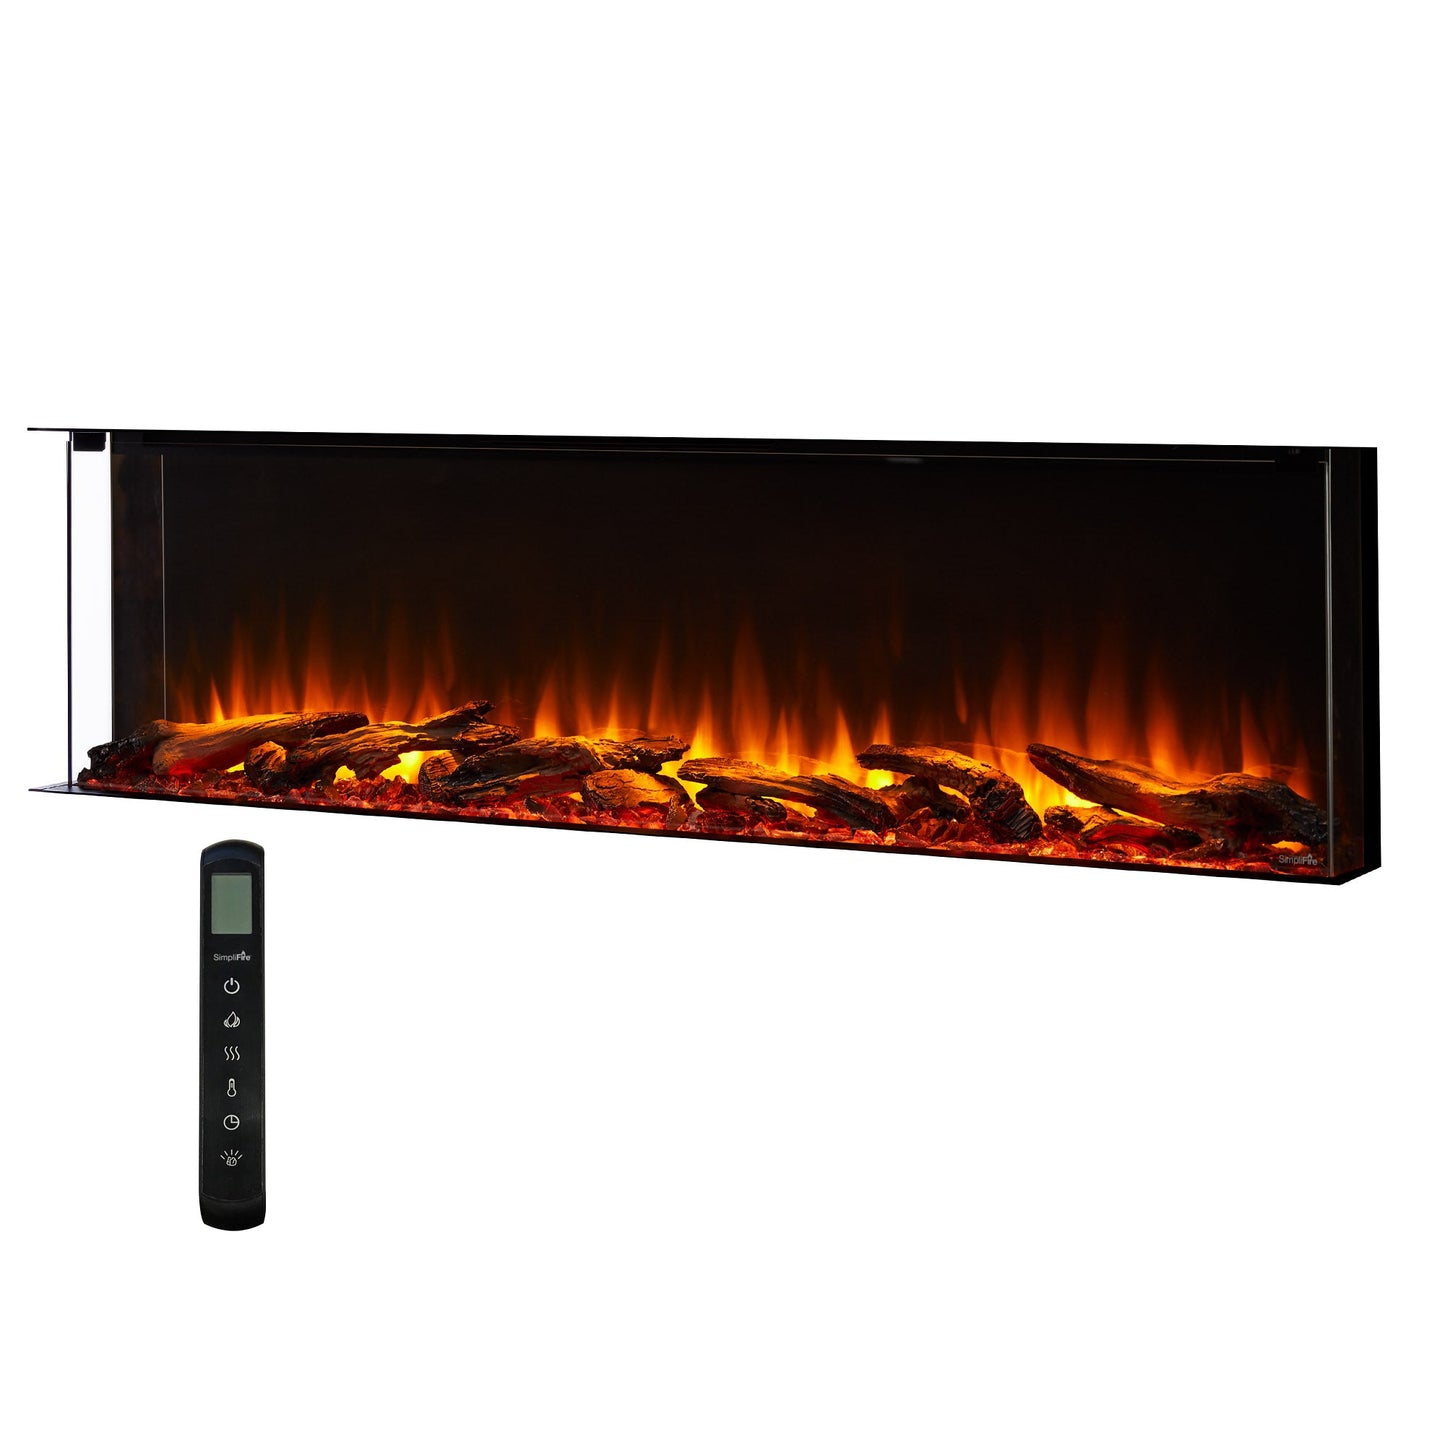 SimpliFire Scion Trinity 55" 3-Sided Linear Electric Built-In Fireplace